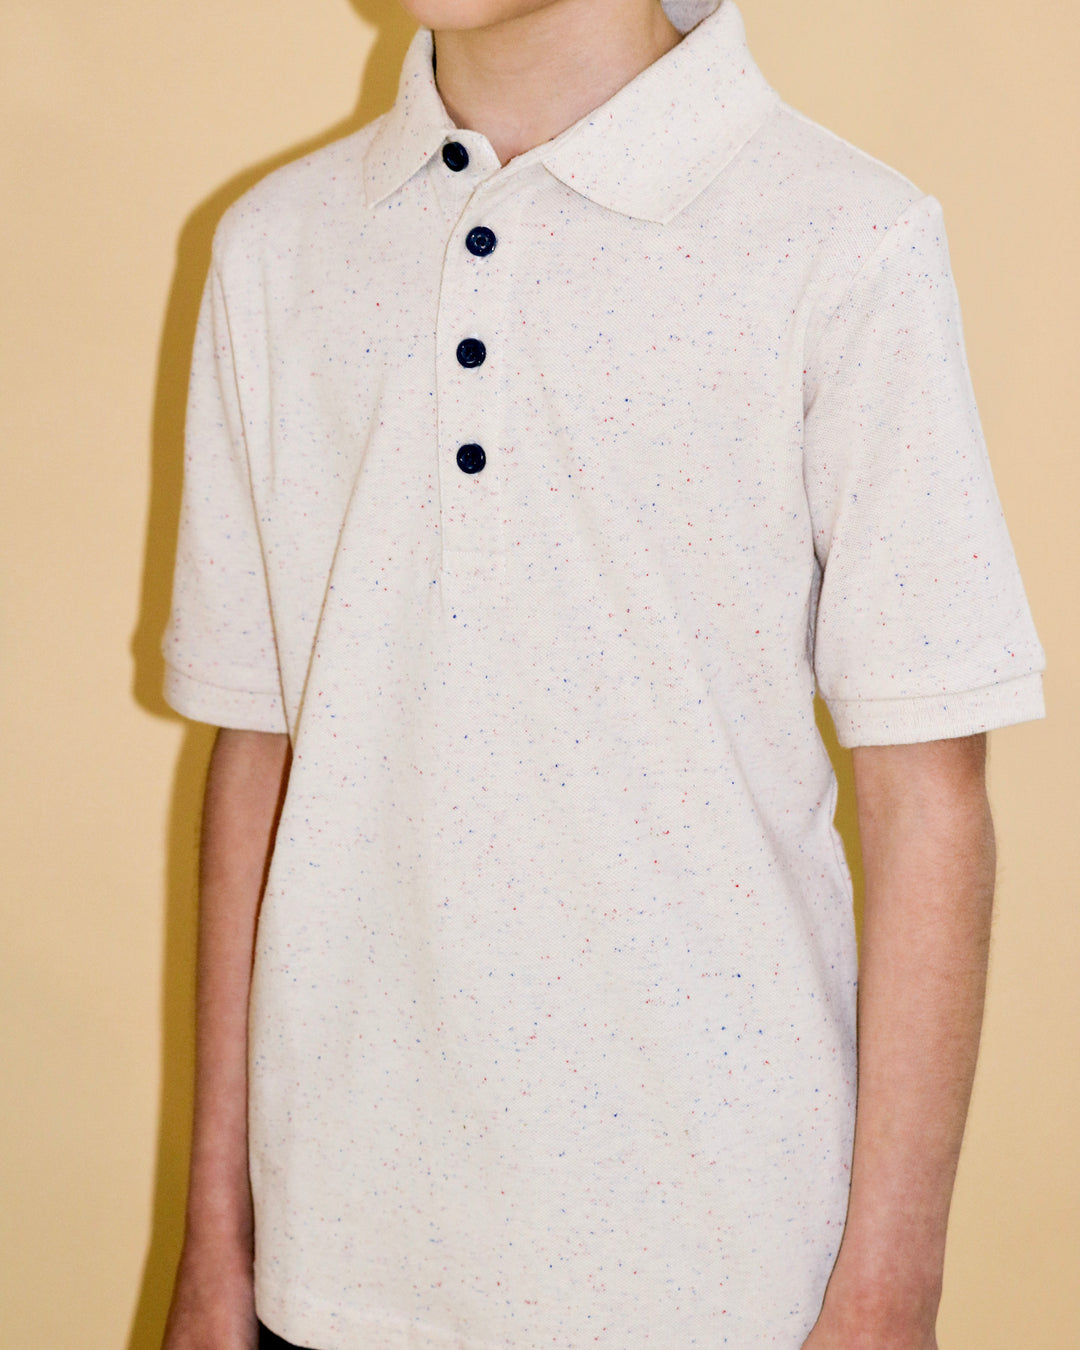 Beige Colored Speckled Polo - Short Sleeve